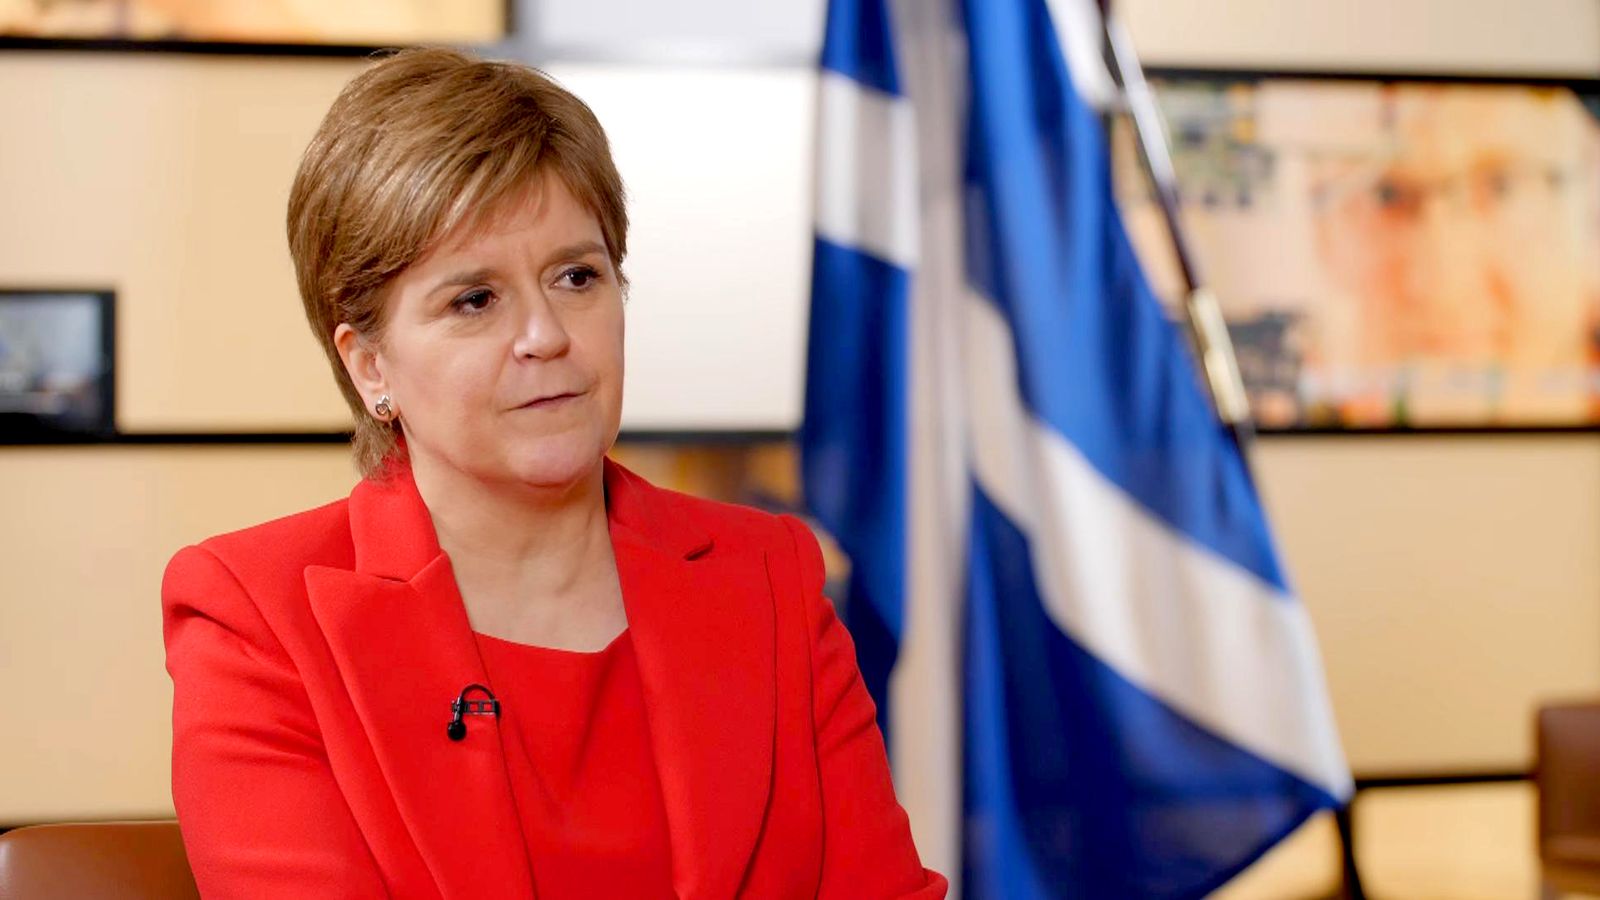 Nicola Sturgeon: Scotland's ex-first minister in custody after being arrested in connection with SNP investigation